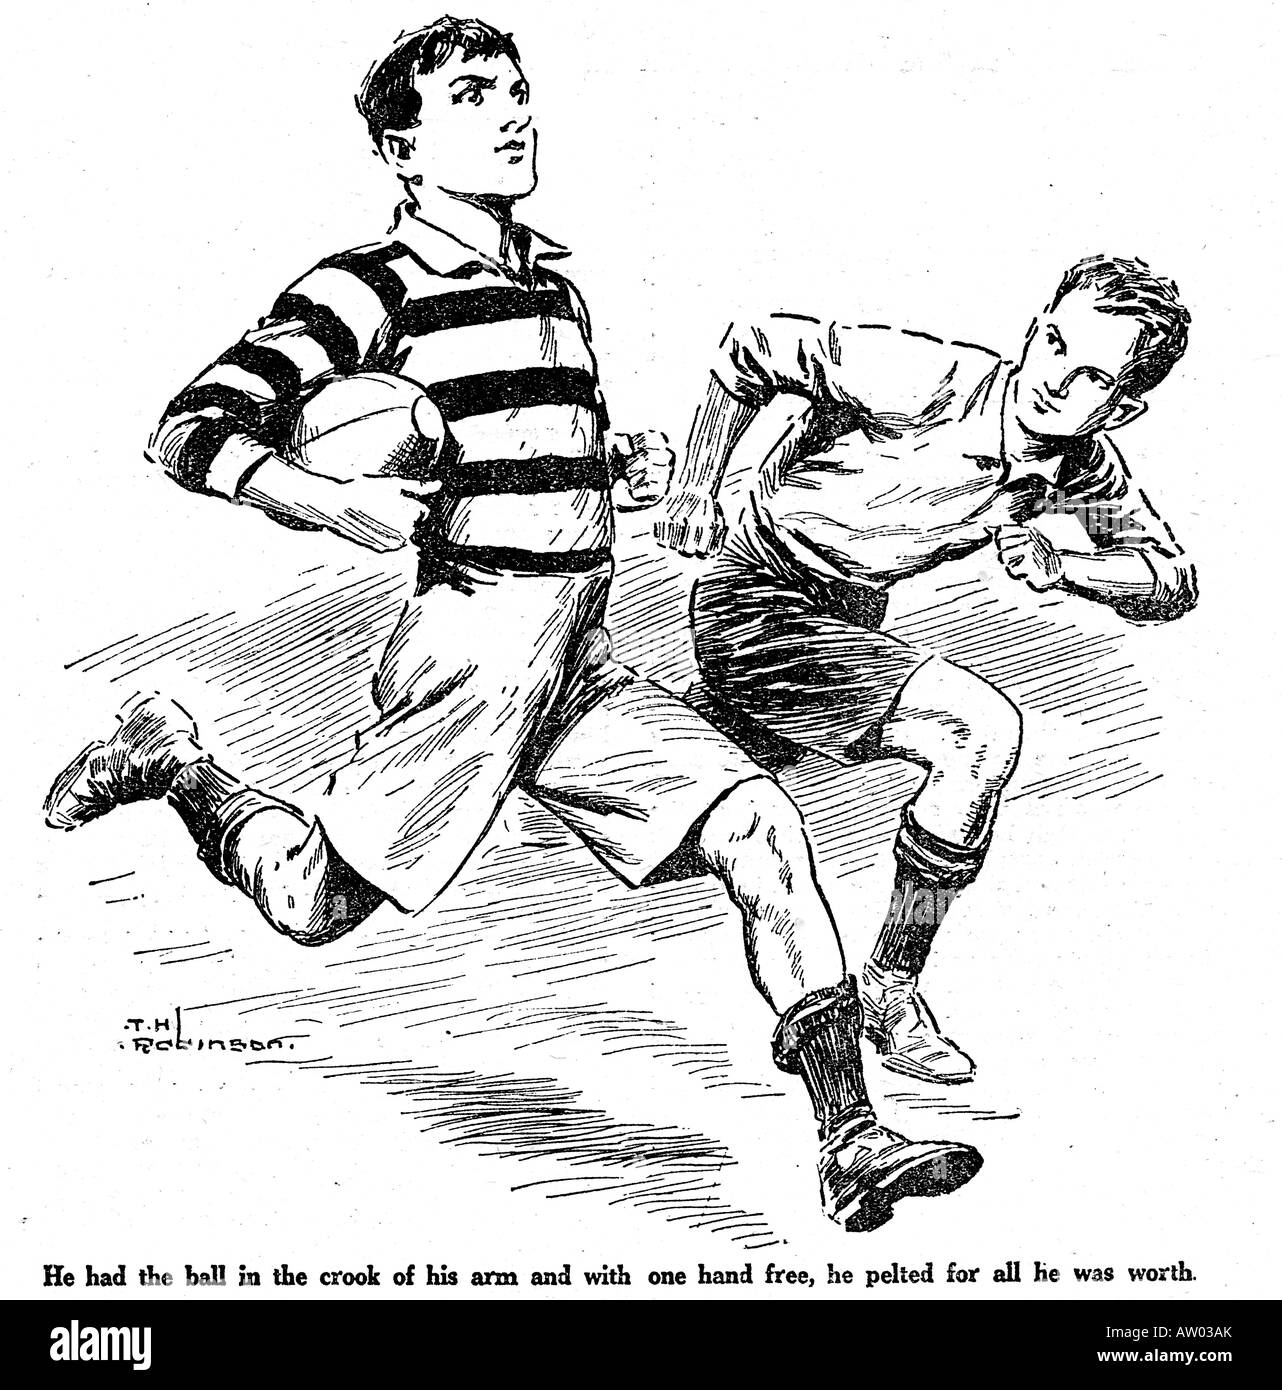 Rugger Ball Under Arm 1927 Illustration from a boys magazine of a school rugger story he pelted for all he was worth Stock Photo